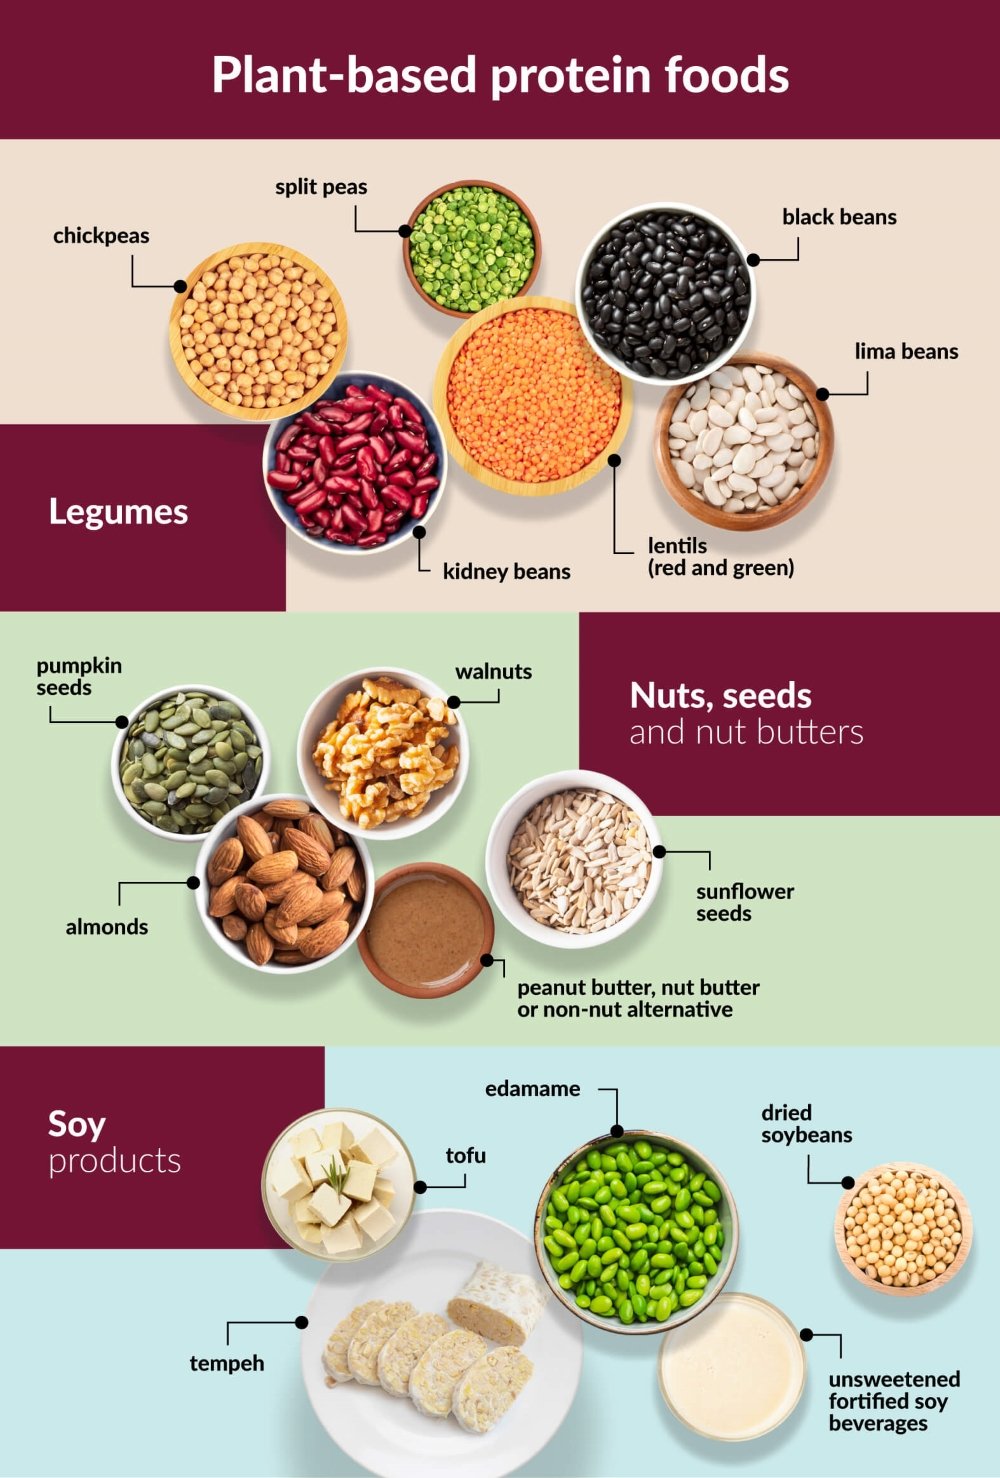 Plant-Based Foods of Canada